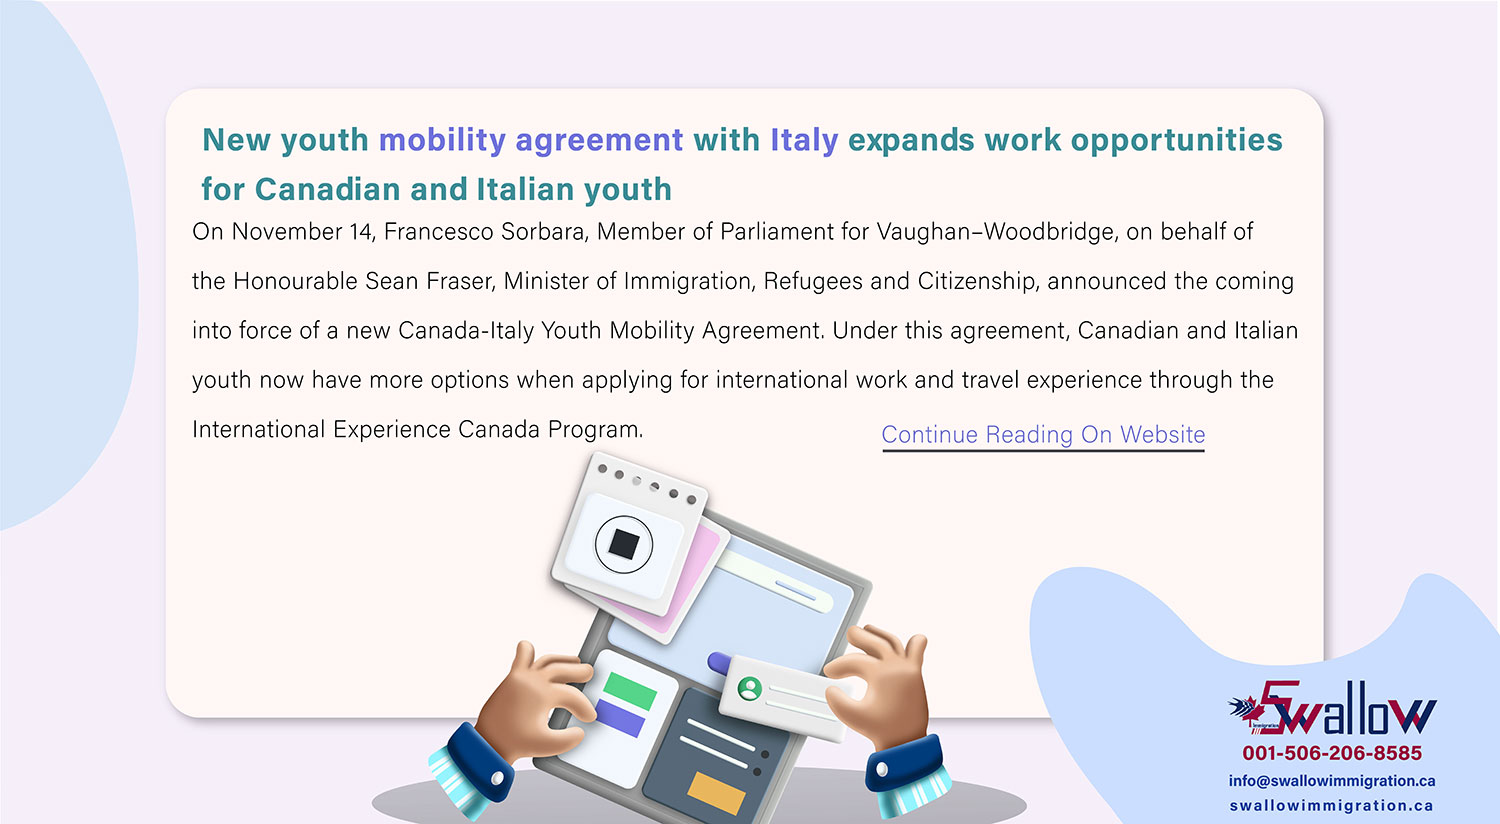 New youth mobility agreement with Italy expands work opportunities for Canadian and Italian youth